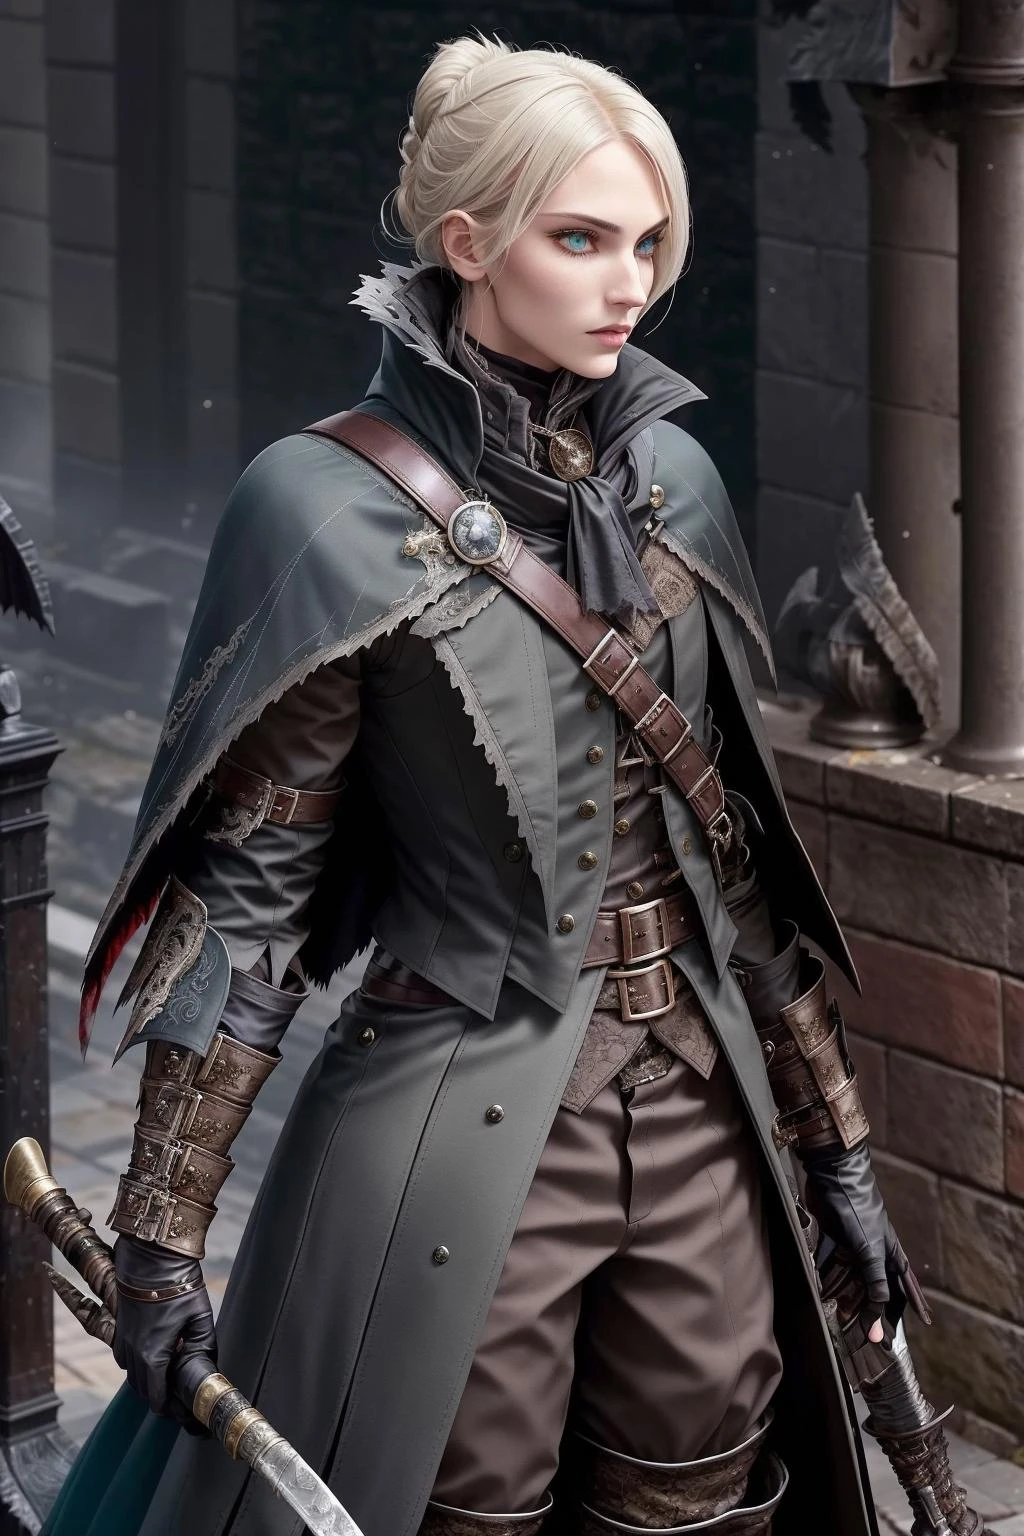 a action photo of a spare warrior, intricate, edgBB, torn clothes, belt, gauntlets, tricorn, vambraces, black gloves, hunter (bloodborne), black capelet, capelet, coat, woman wearing edgBB_outfit, glamorous, perfect face, teal eyes, ash blonde hair, big hair, flat chest, under a starry sky,